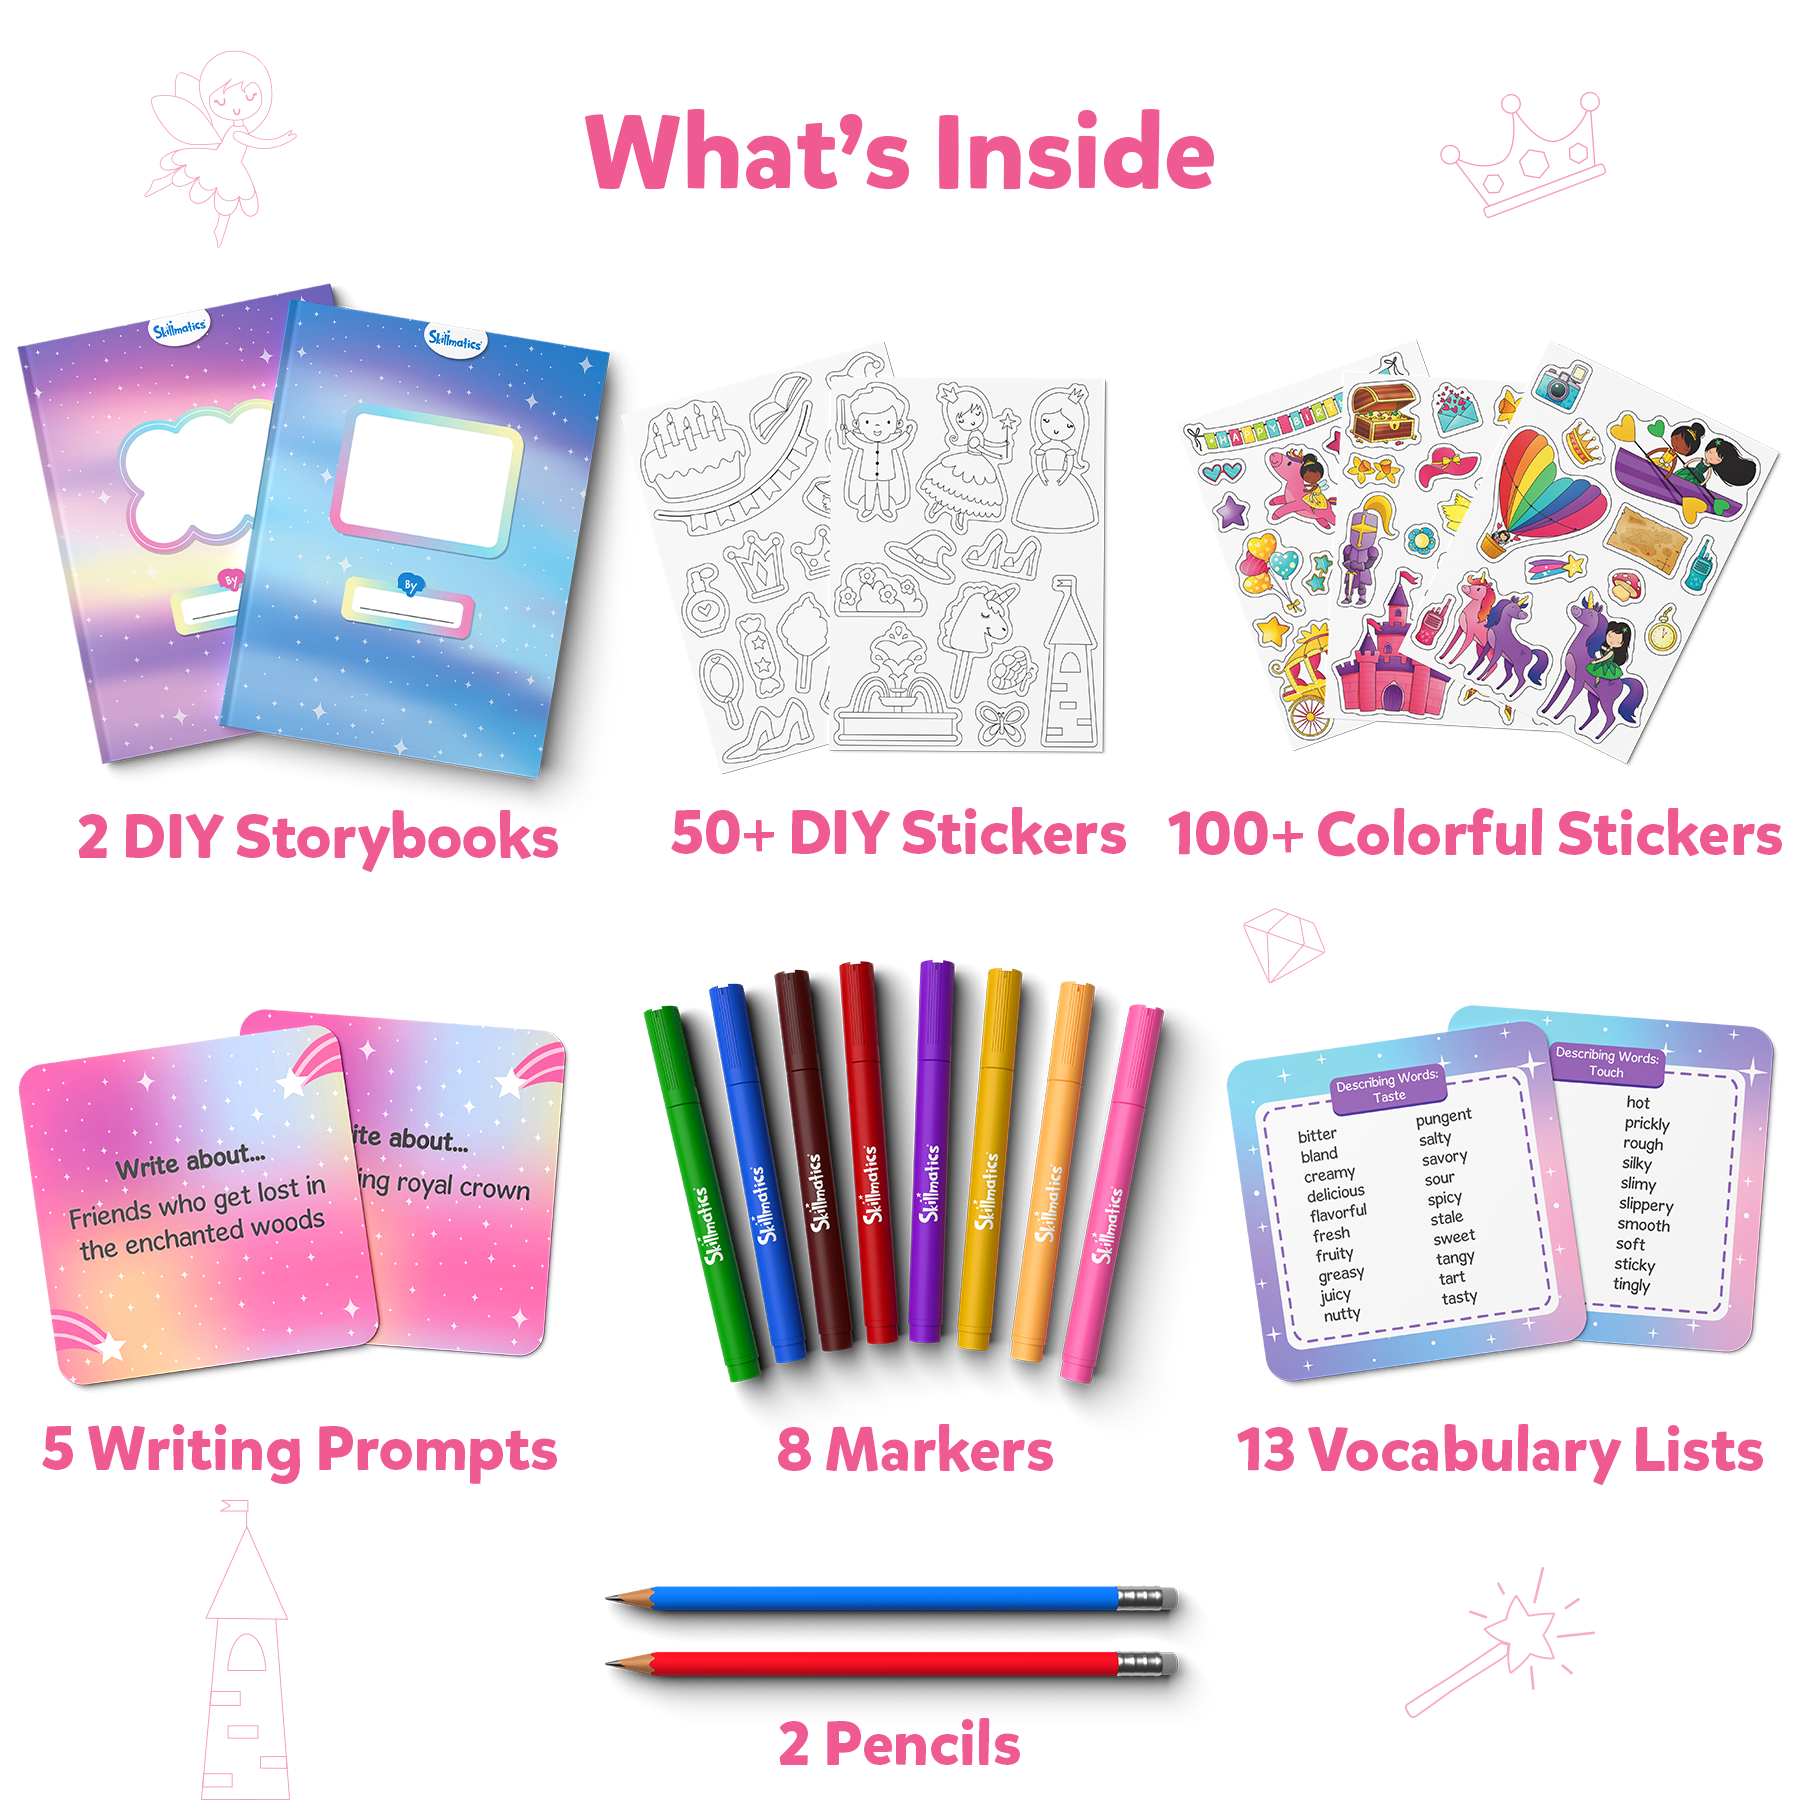 Skillmatics Storybook Art Kit - Unicorn & Princesses Art Kit for Kids, Write & Create Fairytale Storybooks, Creative Activity for Girls, DIY Kit, 150+ Stickers, Gifts for Ages 5, 6, 7, 8, 9, 10